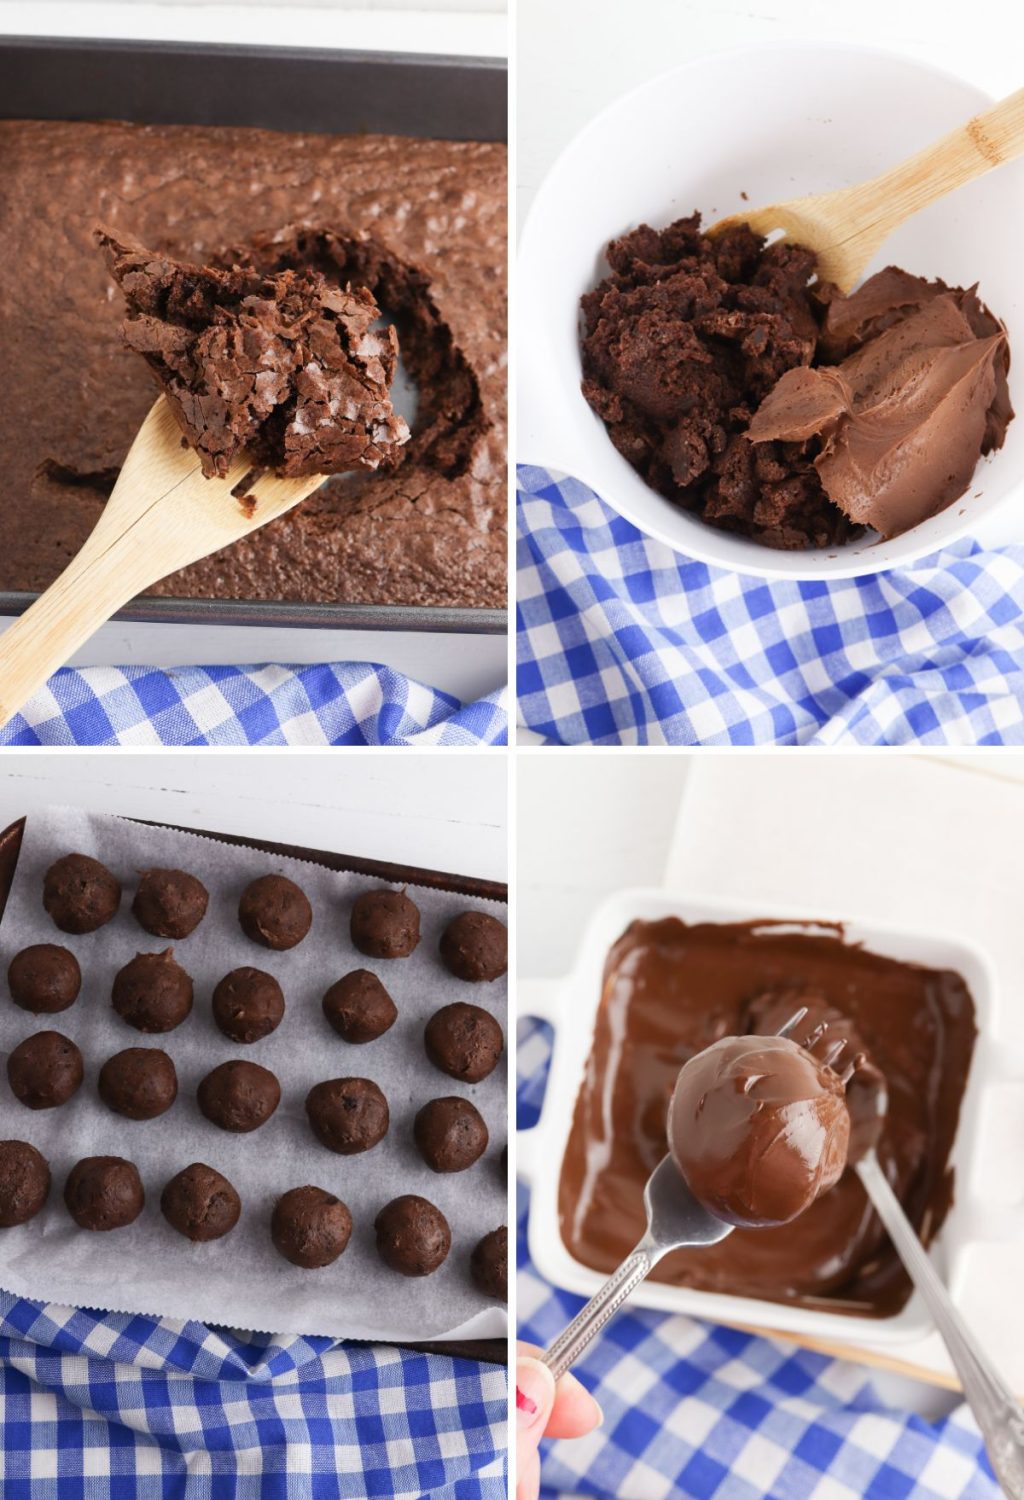 A series of photos showing how to make a chocolate cake.